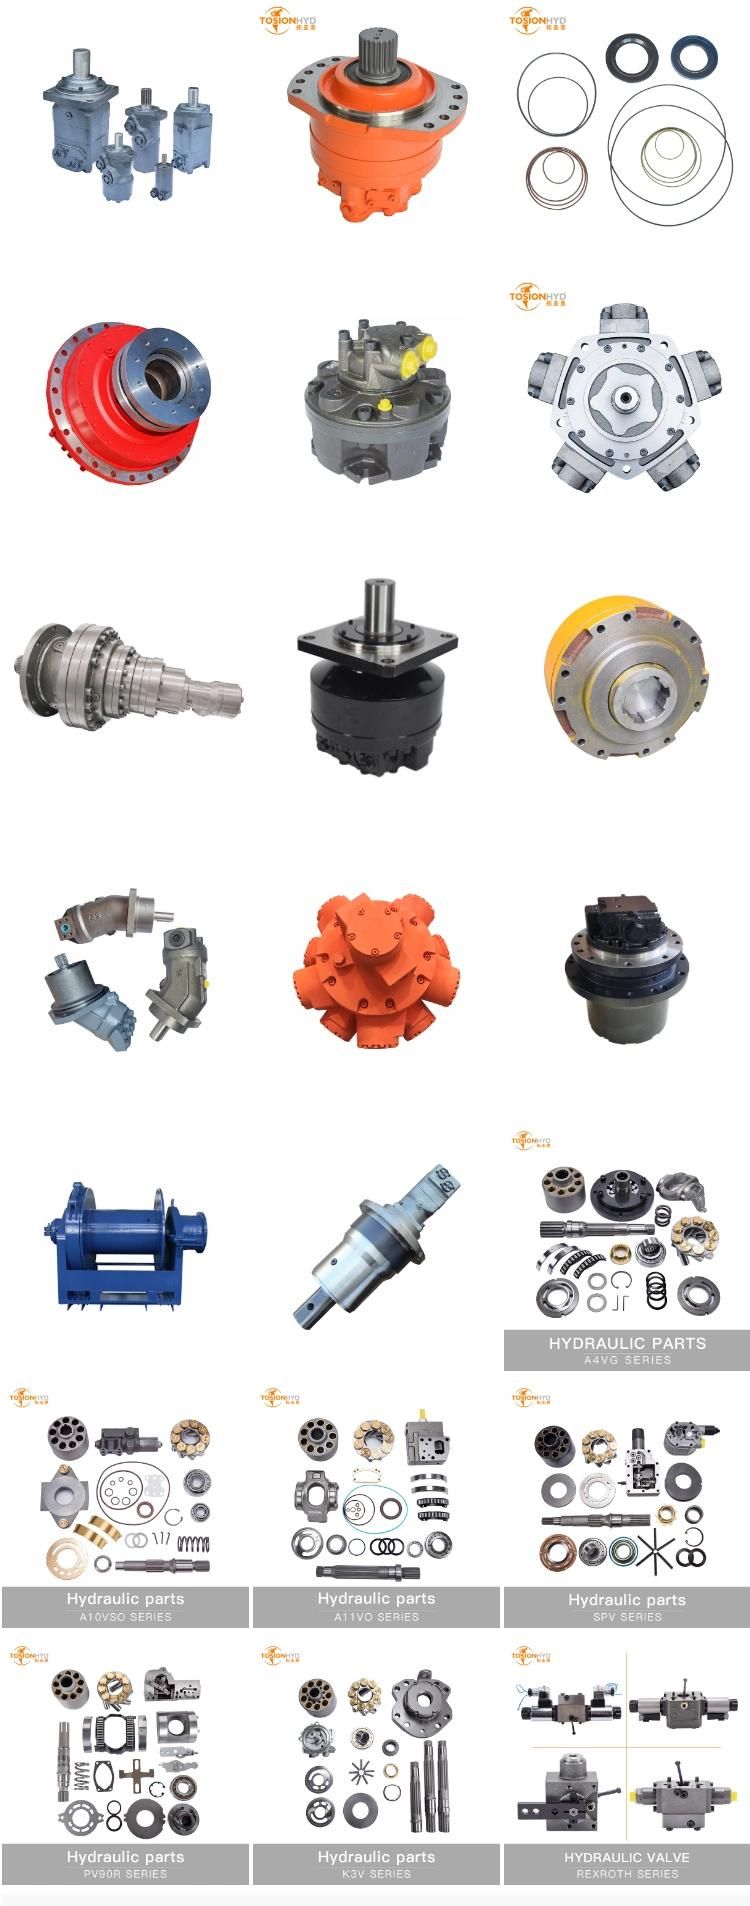 A2FM32 A2FM45 Hydraulic Motor Parts with Rexroth Spare Repair Kits